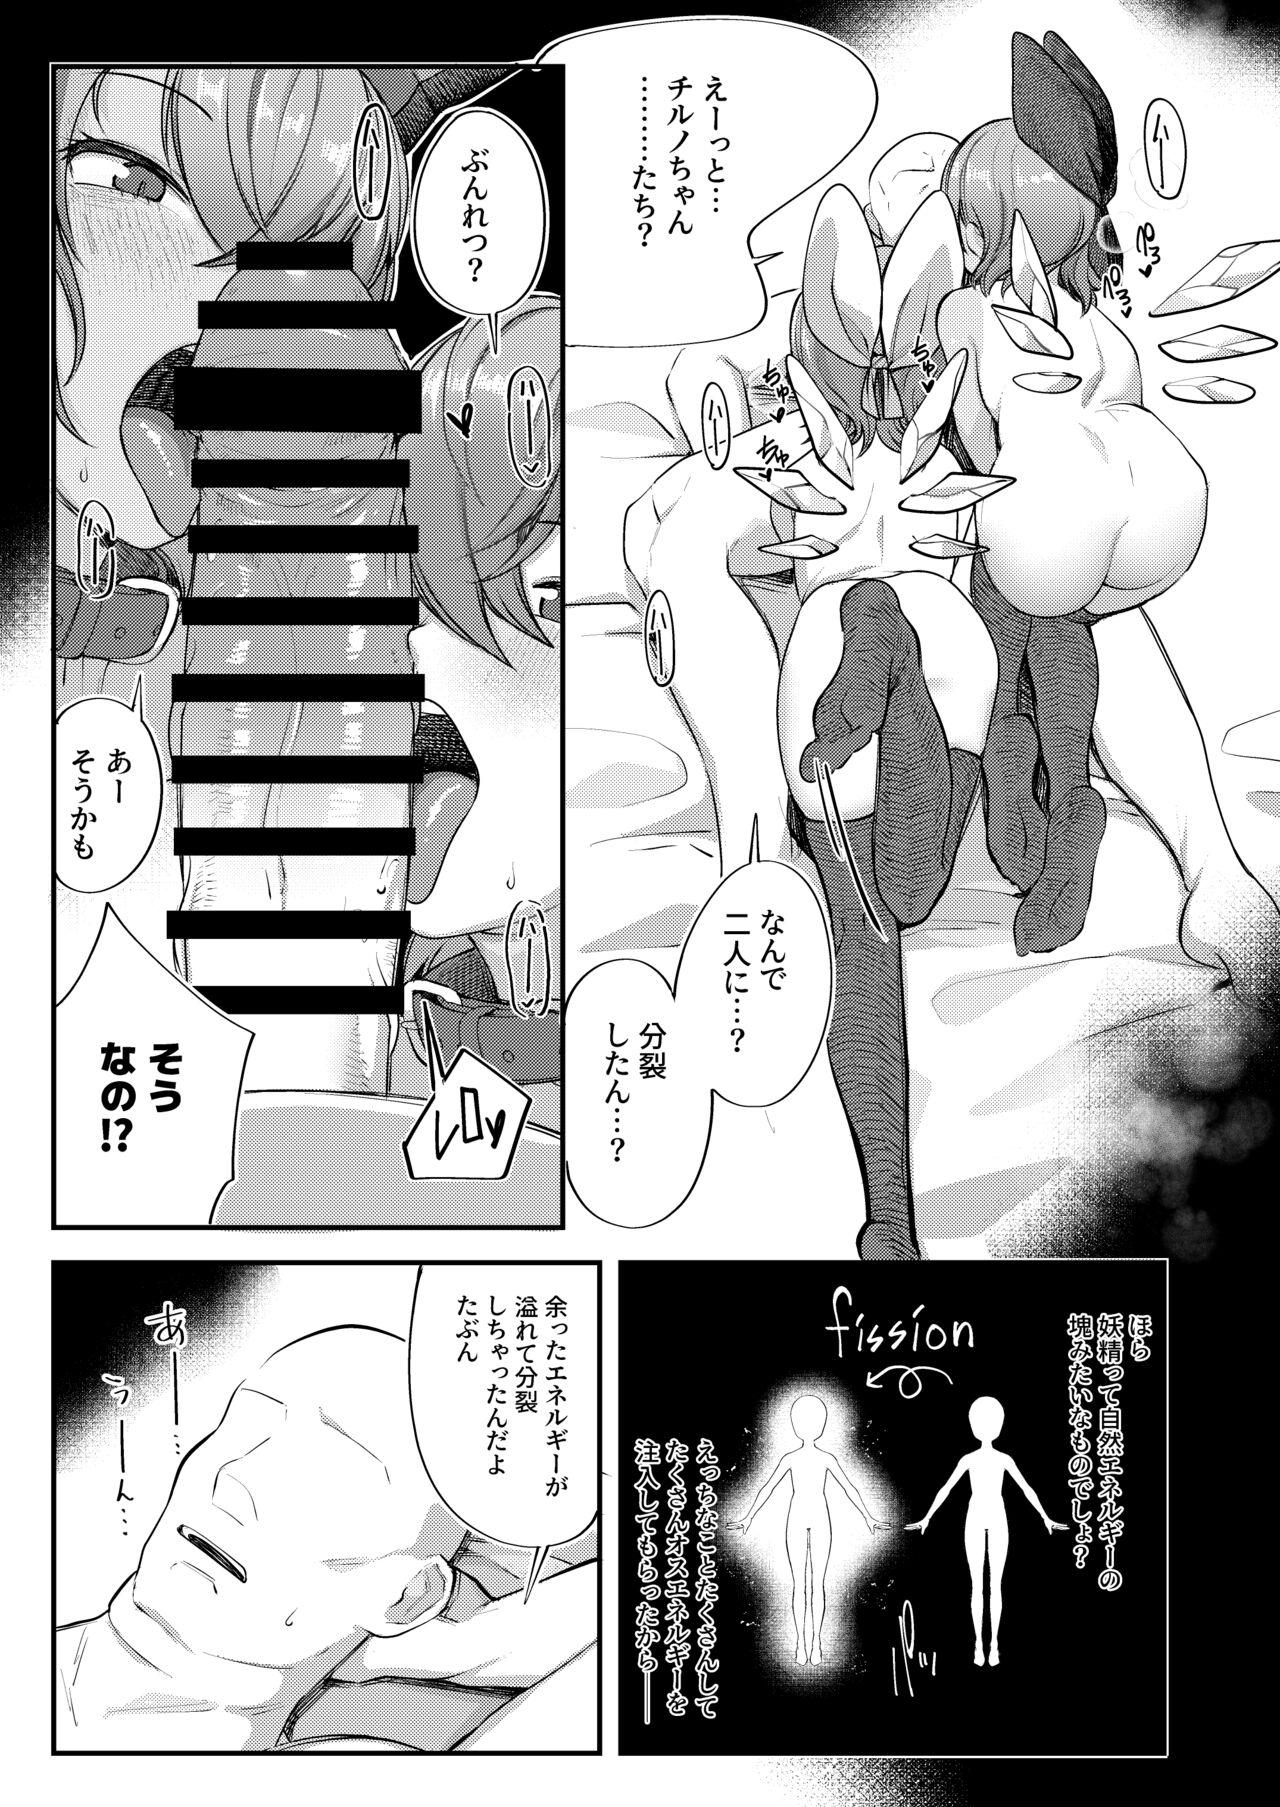 Butt Plug Cirno to Cirno - Touhou project Gaycum - Page 6